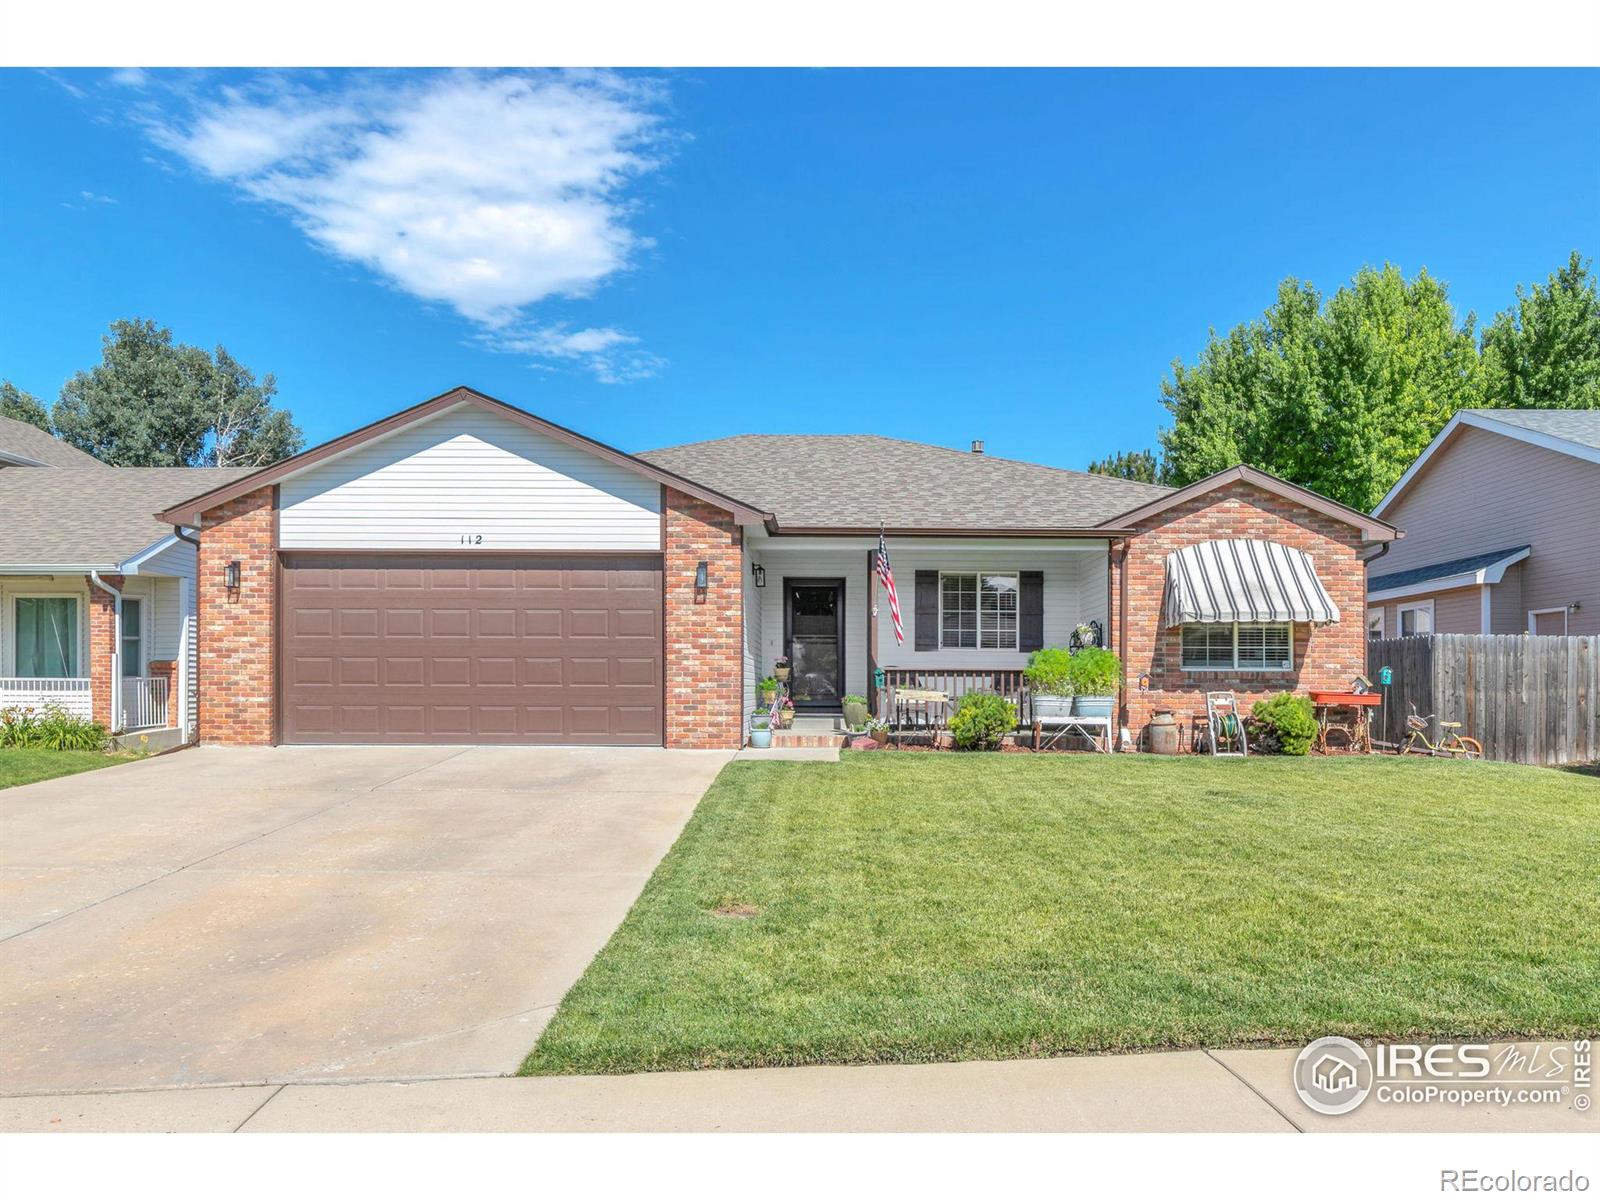 112  51st Avenue, greeley MLS: 123456789994299 Beds: 5 Baths: 3 Price: $480,000